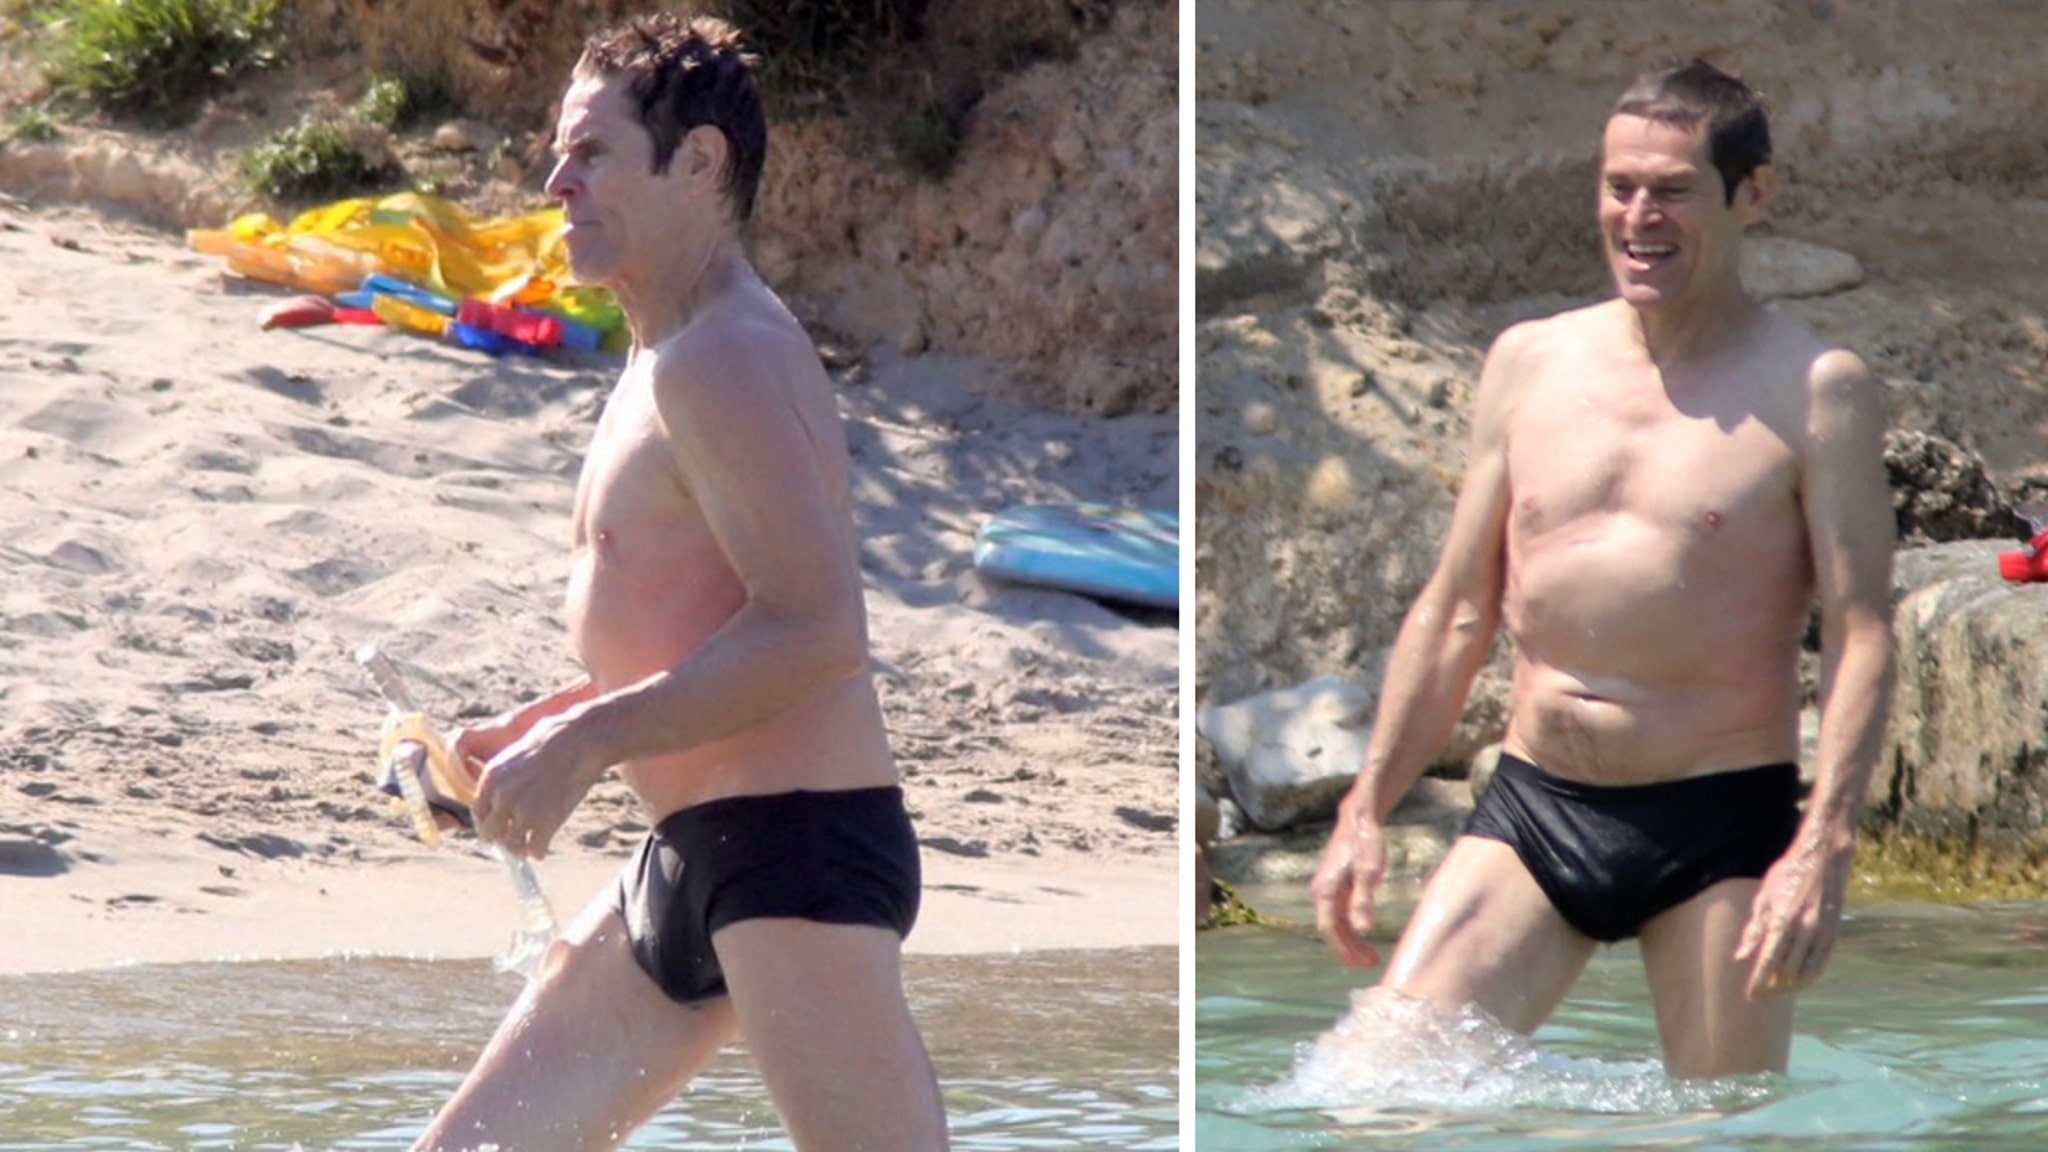 Guess who Willem Dafoe brought on vacation with him.